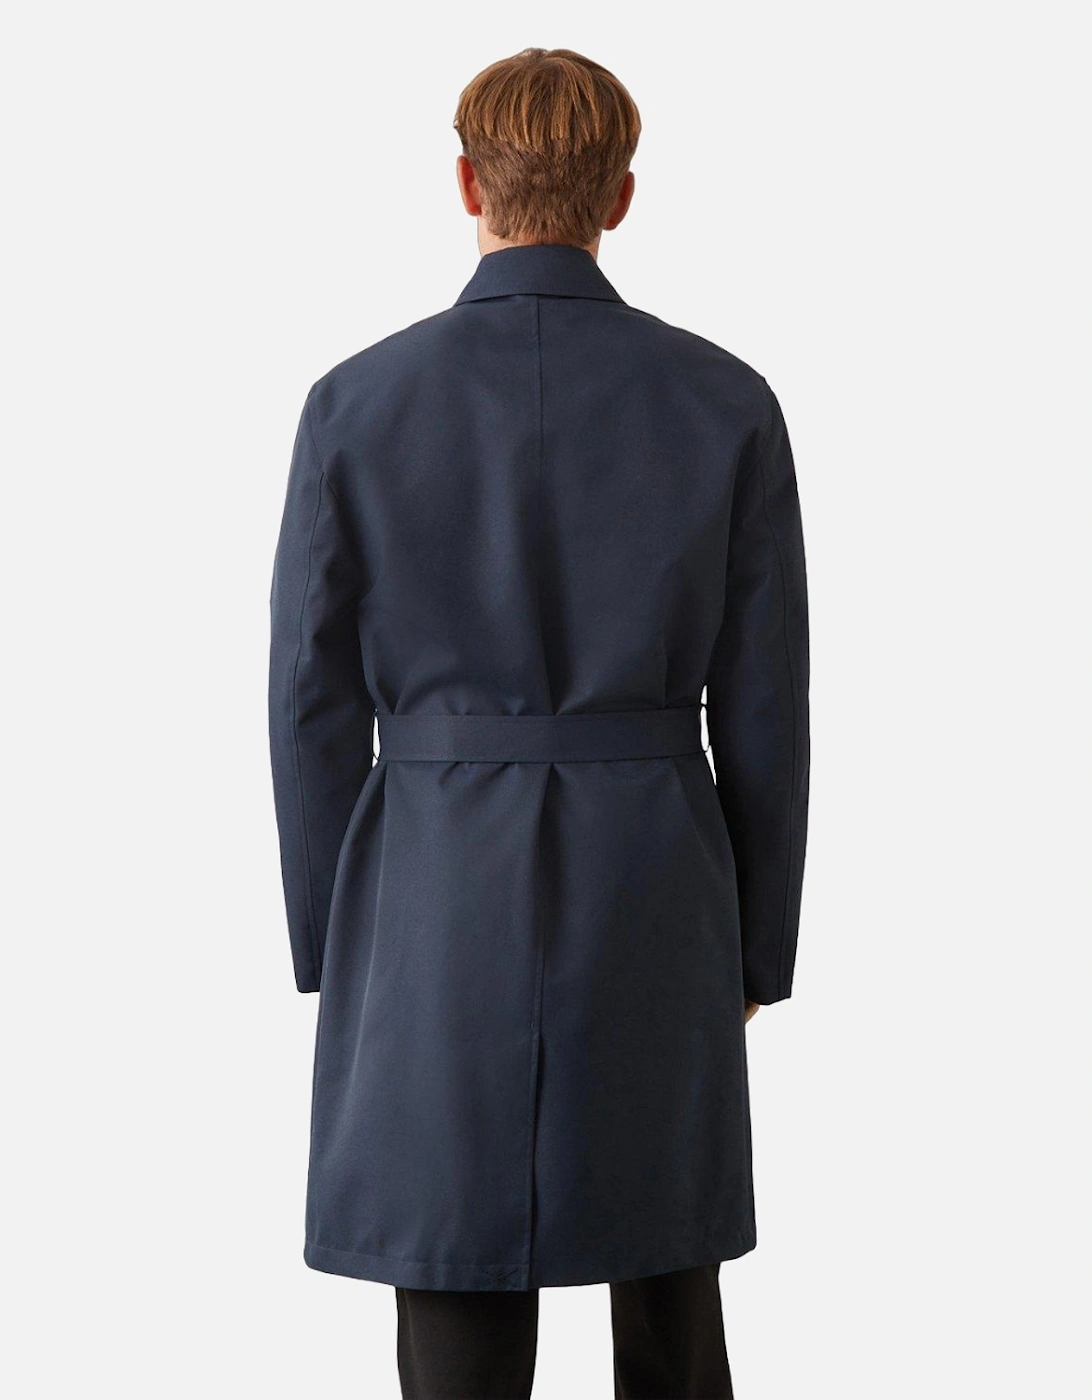 Mens Double-Breasted Trench Coat